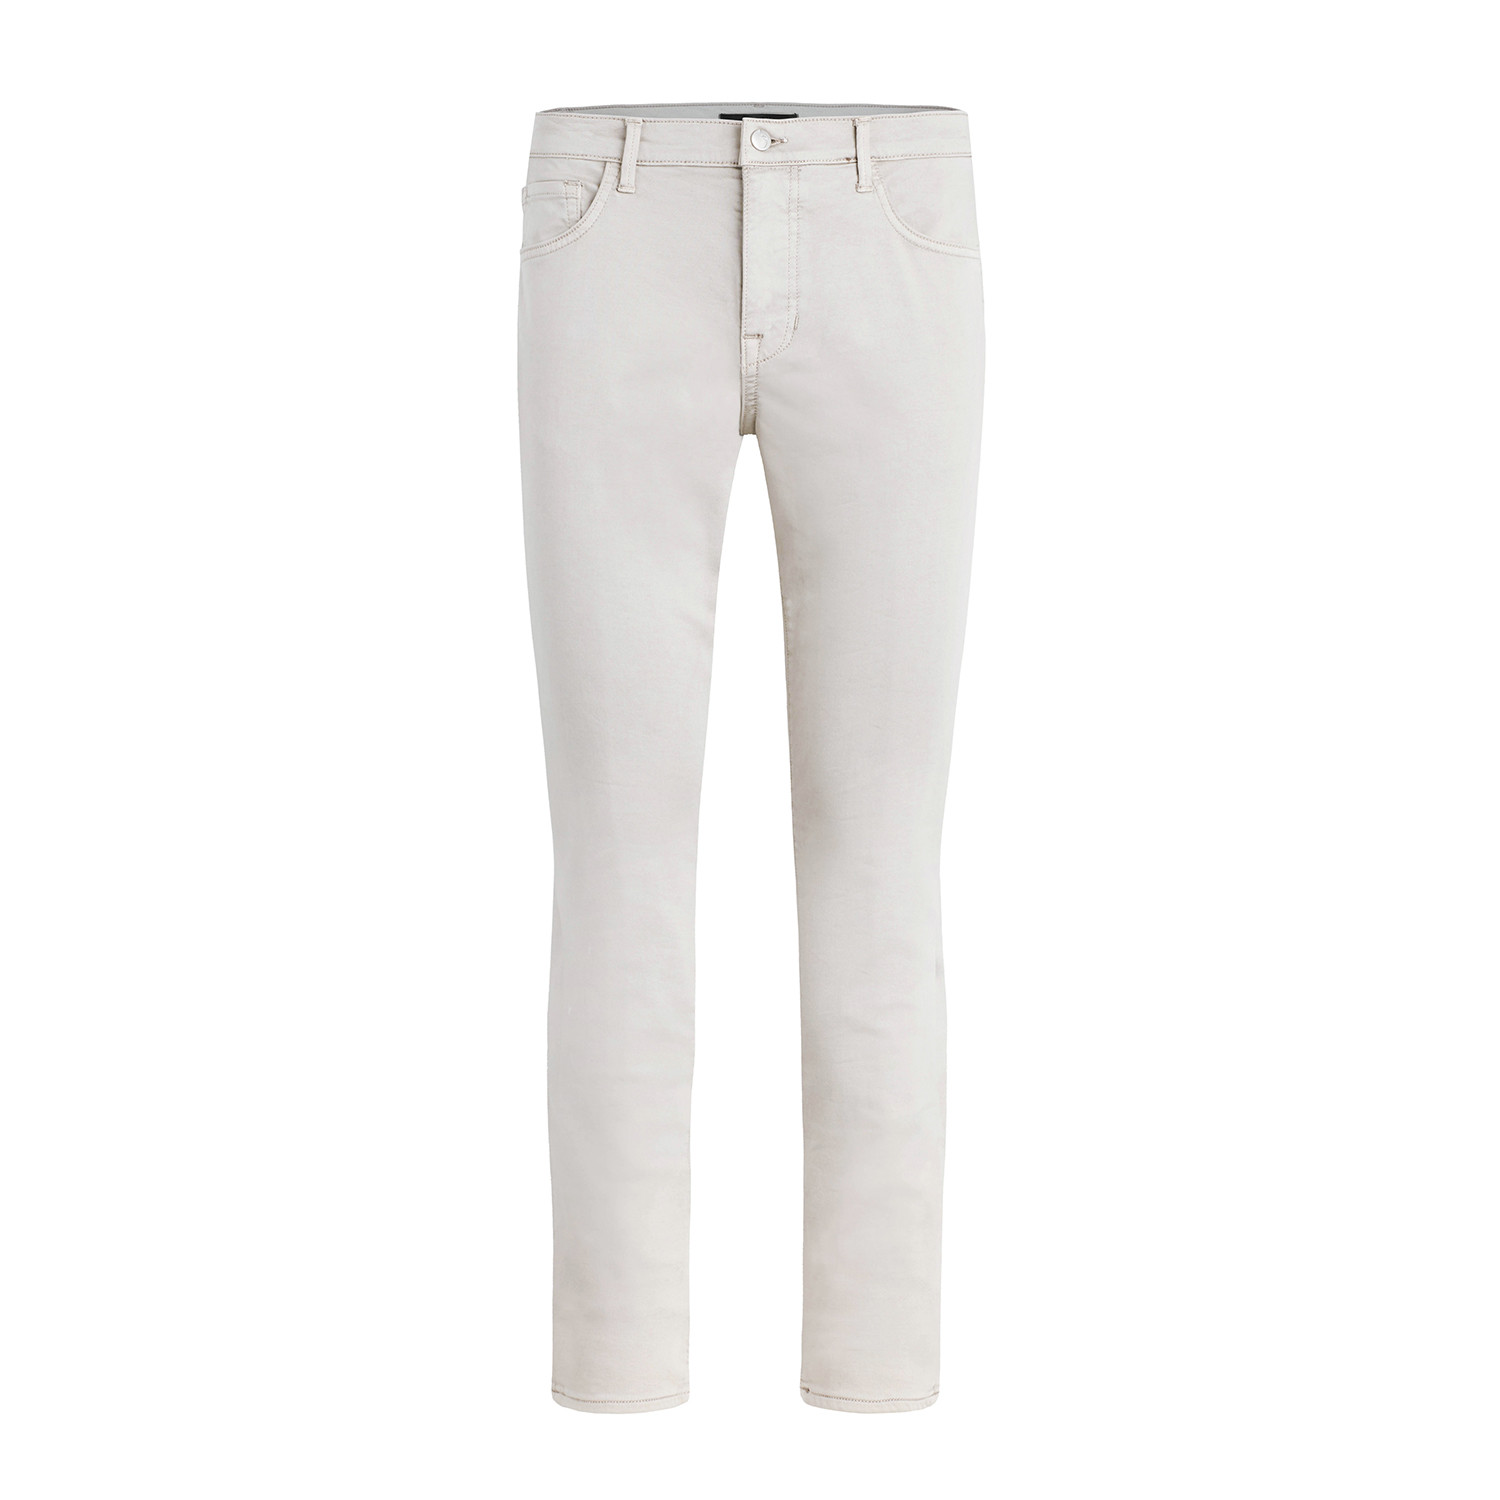 French Terry Asher // Khaki Wheat (36WX34L) - Joe's Jeans - Touch of Modern